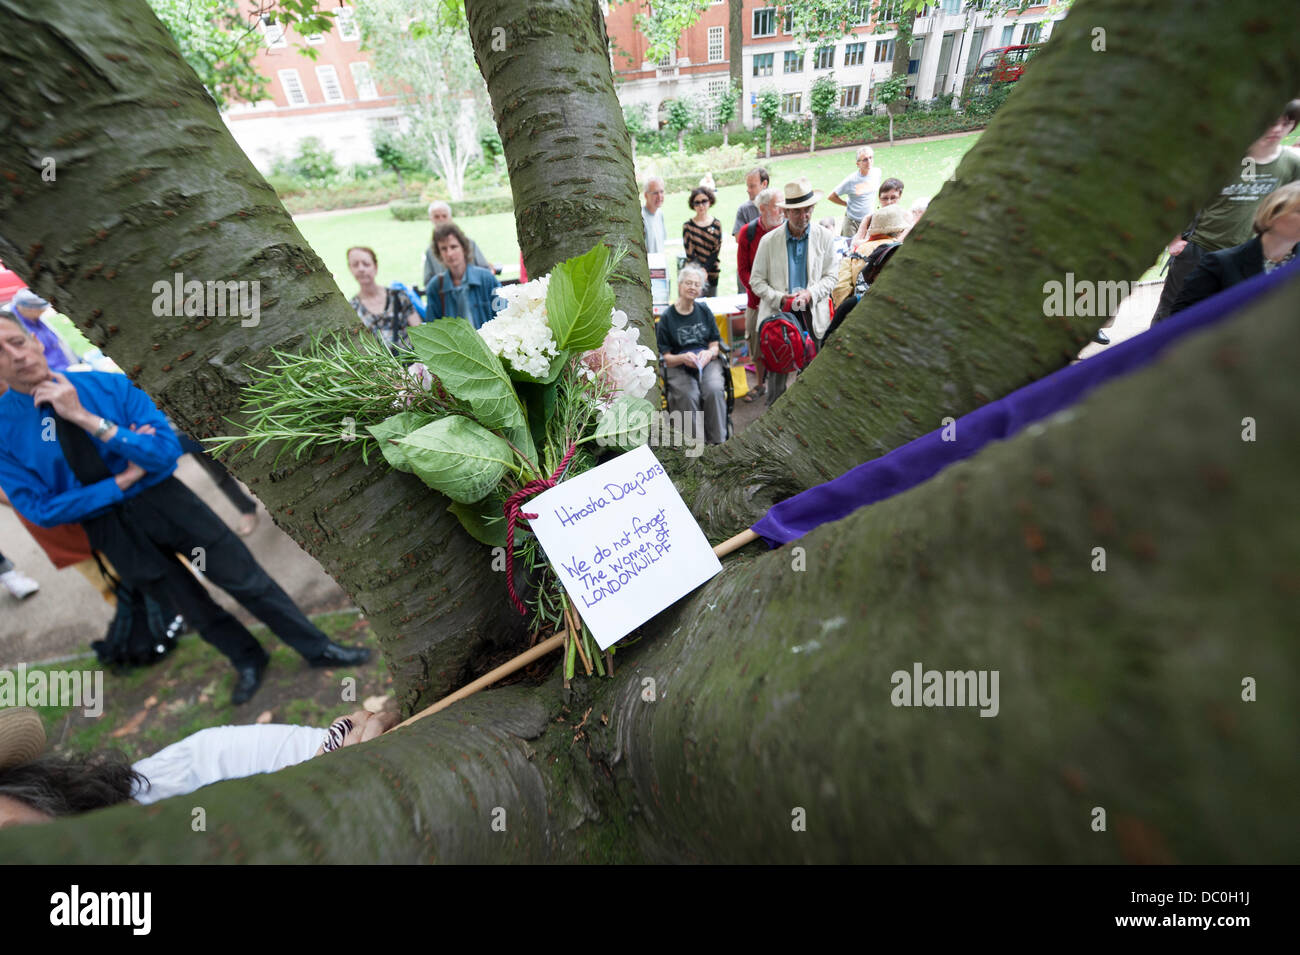 London, UK, 6th August, 2013. A ceremony of readings and song in memory of the victims of Hiroshima was held in Tavistock Square together with wreaths laid on a Japanese cherry tree in the gardens. The 6th Aug. 2013 marks the 68th anniversary of the atomic bomb explosion in 1945. Credit:  Lee Thomas/Alamy Live News Stock Photo